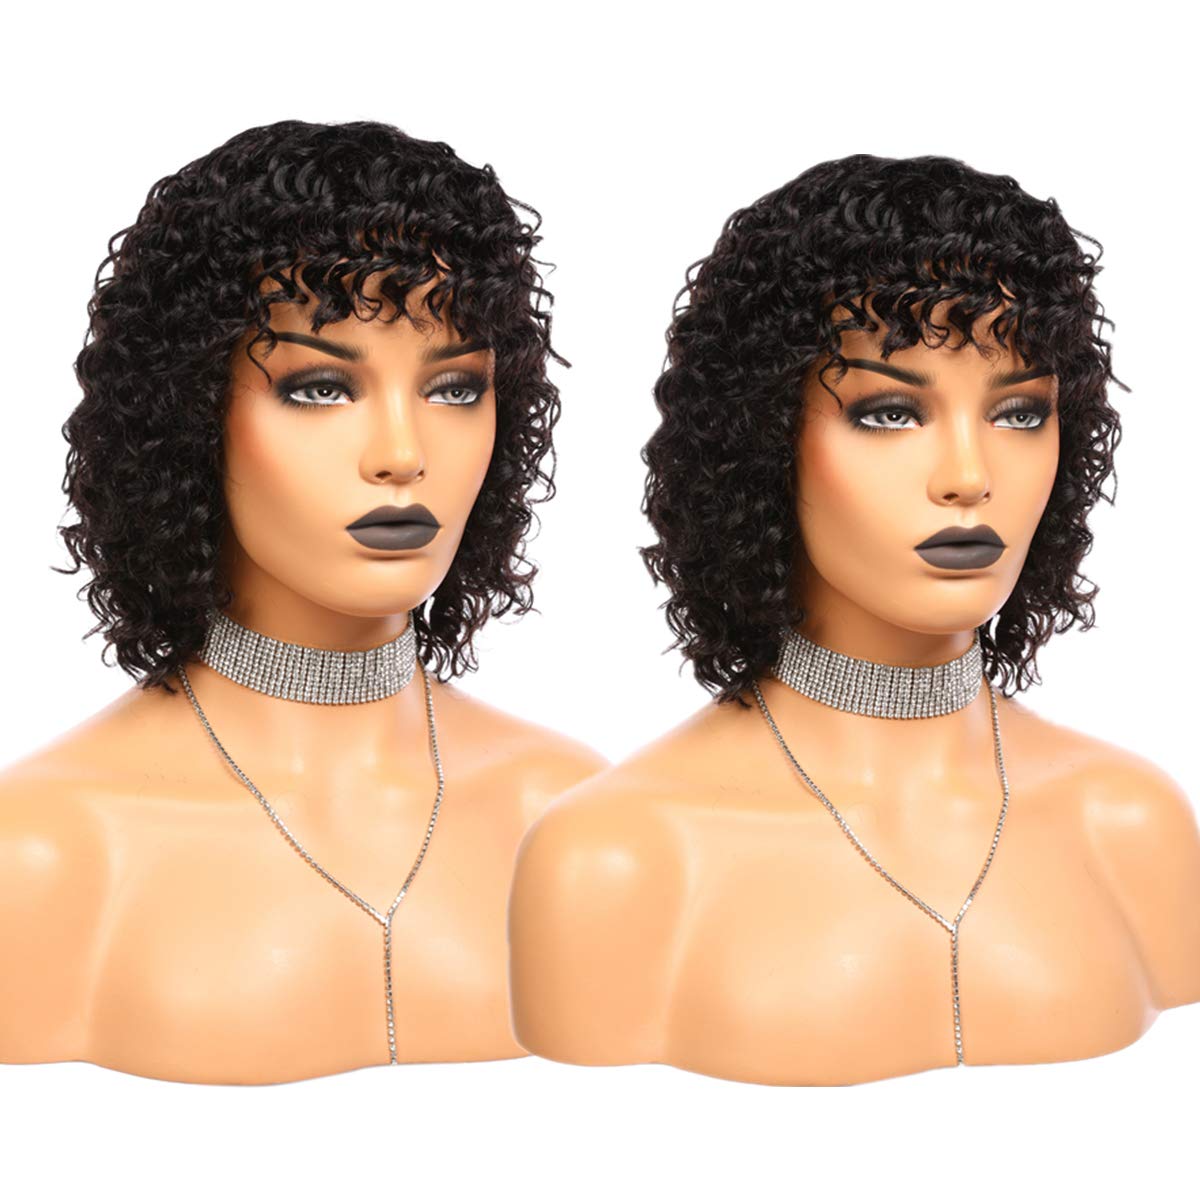 Gluna Hair Short Curly Bob Non Lace Front Machine Made Wig Natural Color for Black Women